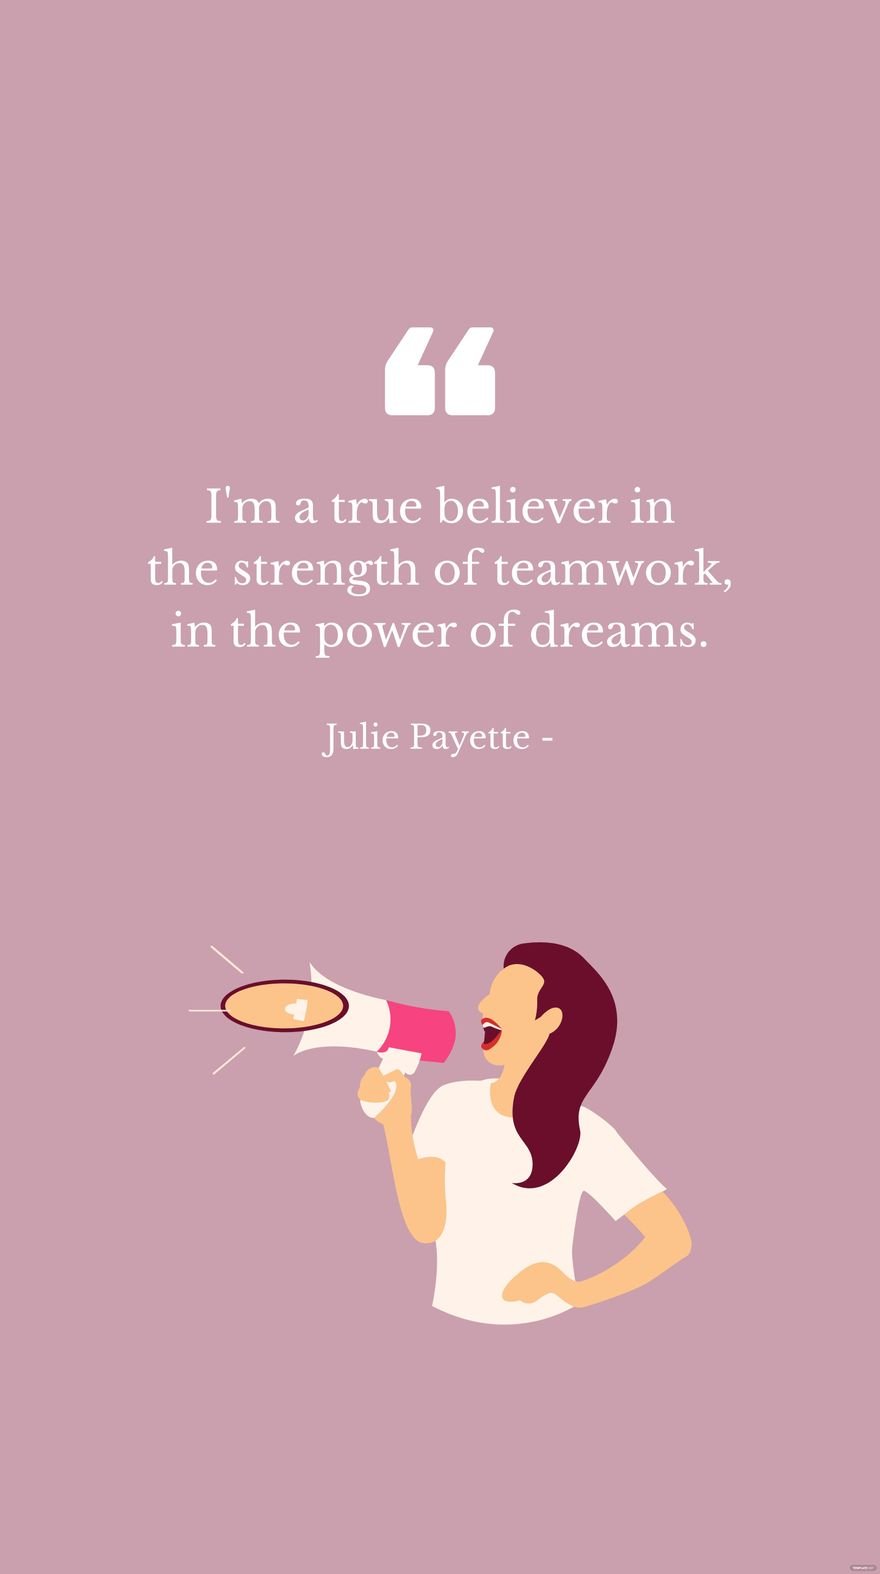 Free Julie Payette - I'm a true believer in the strength of teamwork, in the power of dreams. in JPG